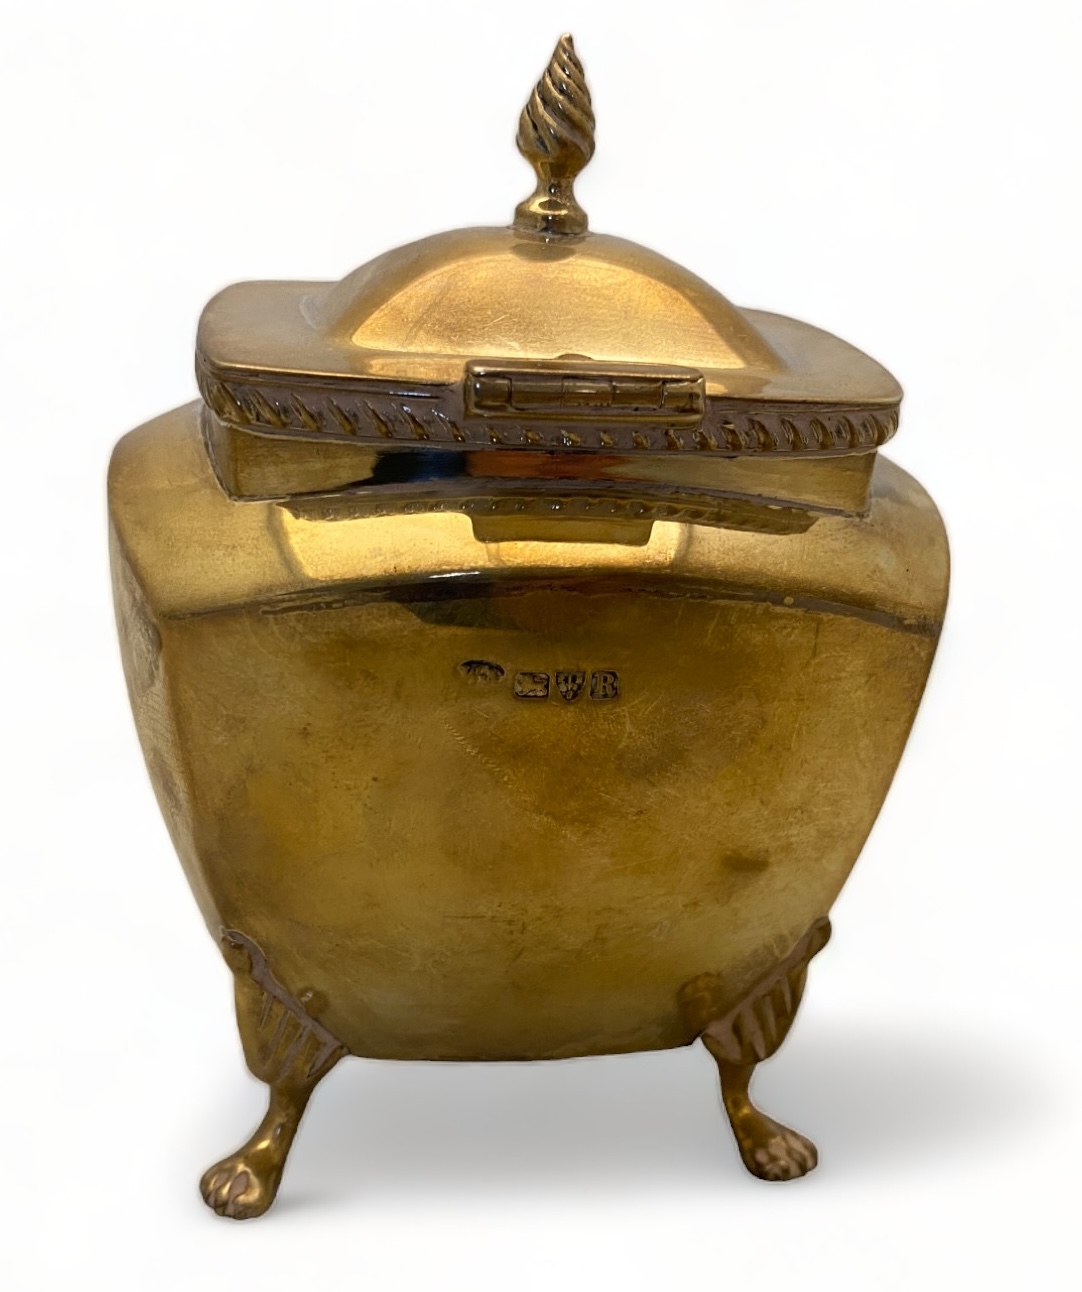 A silver Georgian style tea caddy, William Aitken, Chester, 1900 - Image 3 of 8